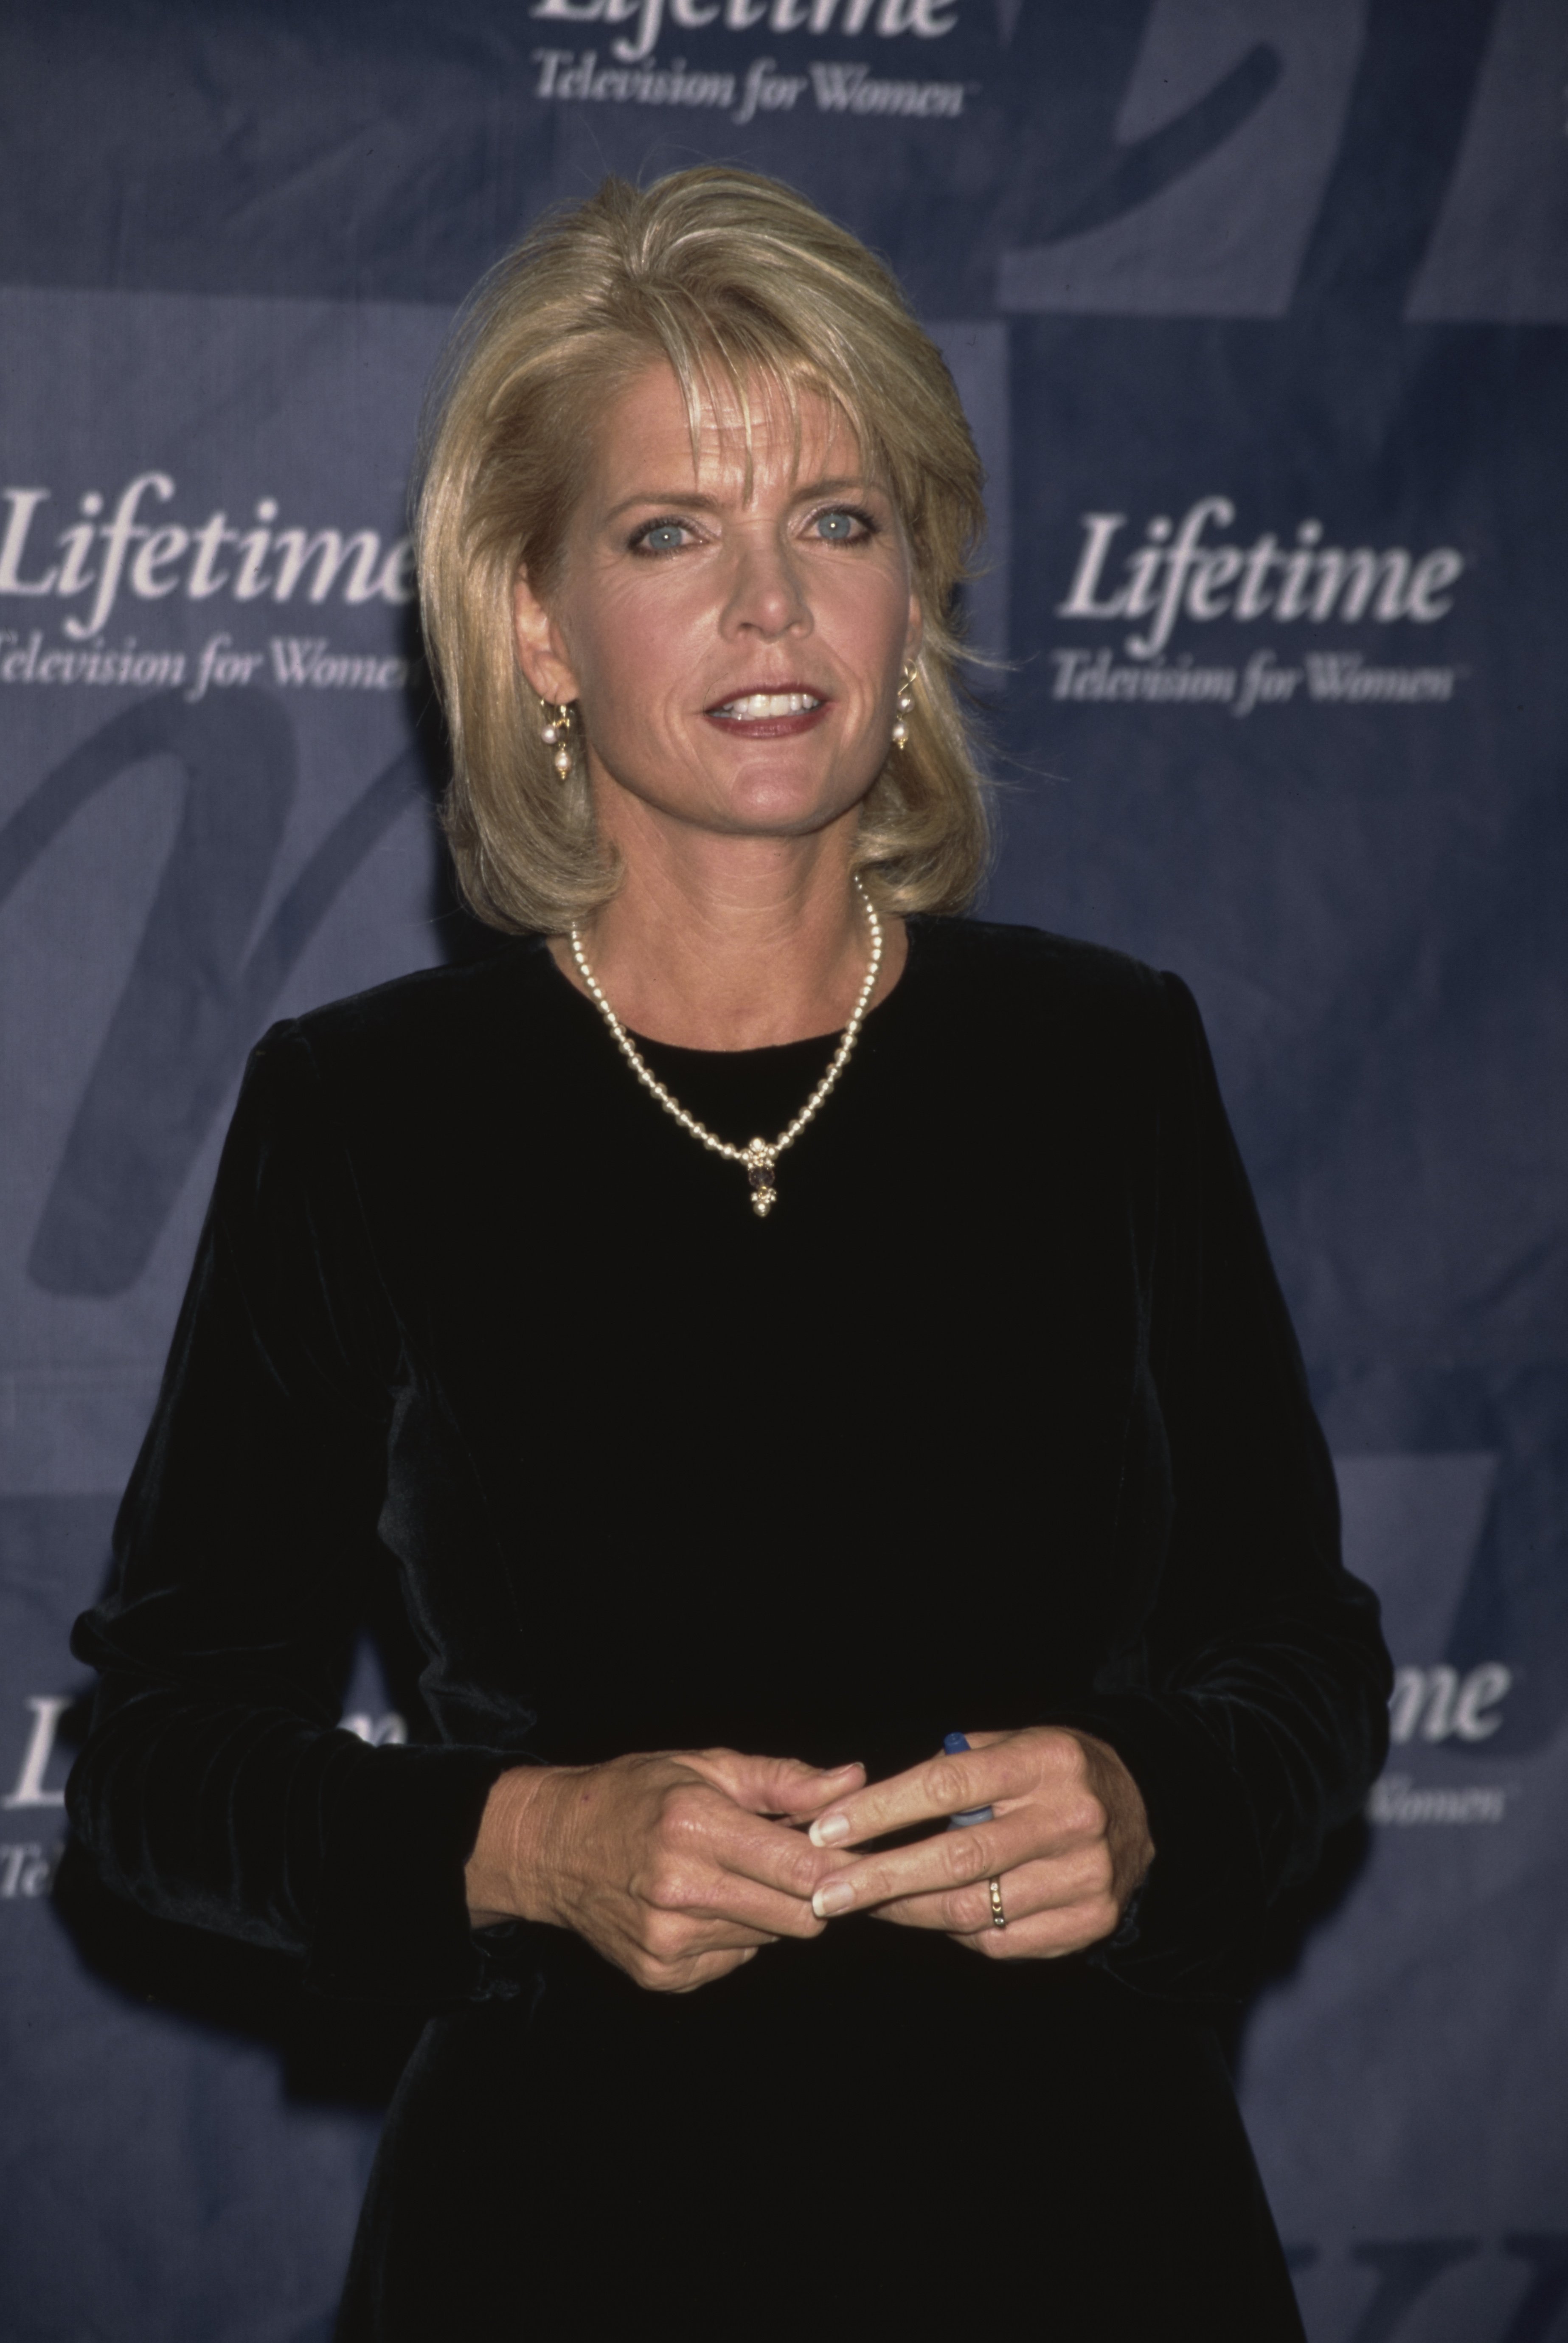 chad l recommends Meredith Baxter Breast Exam